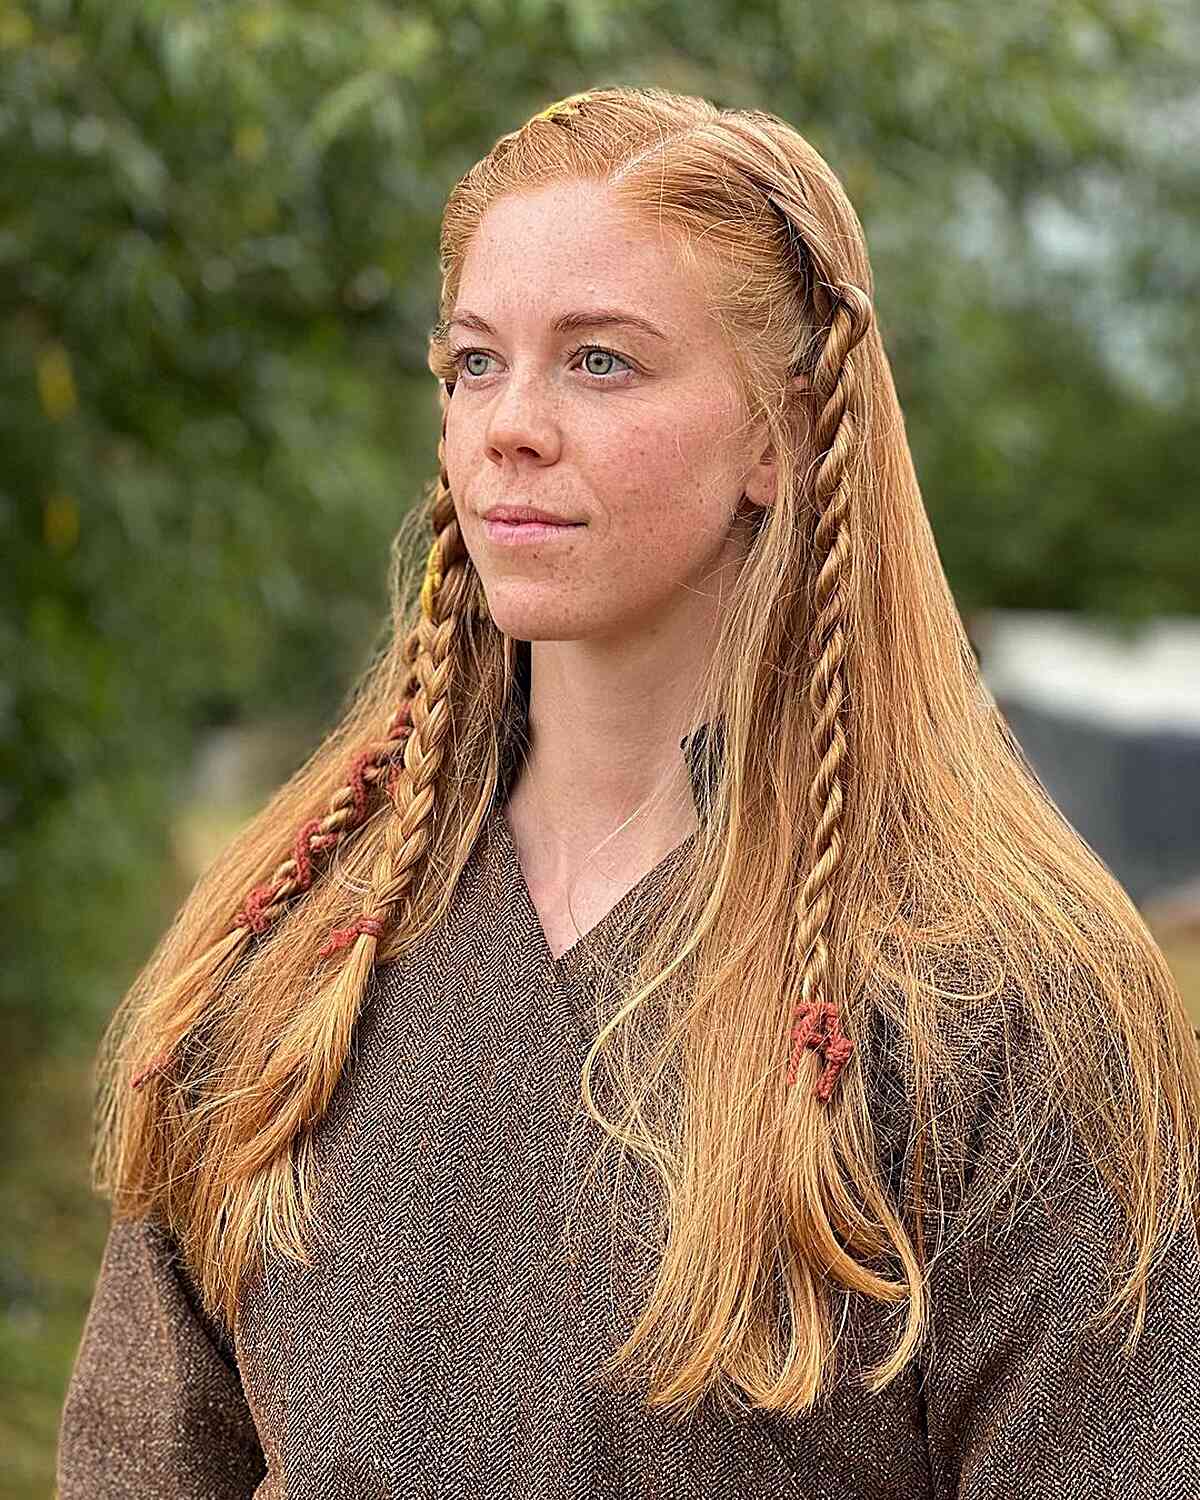 Viking hairstyles for women with long hair – it's all about braids!